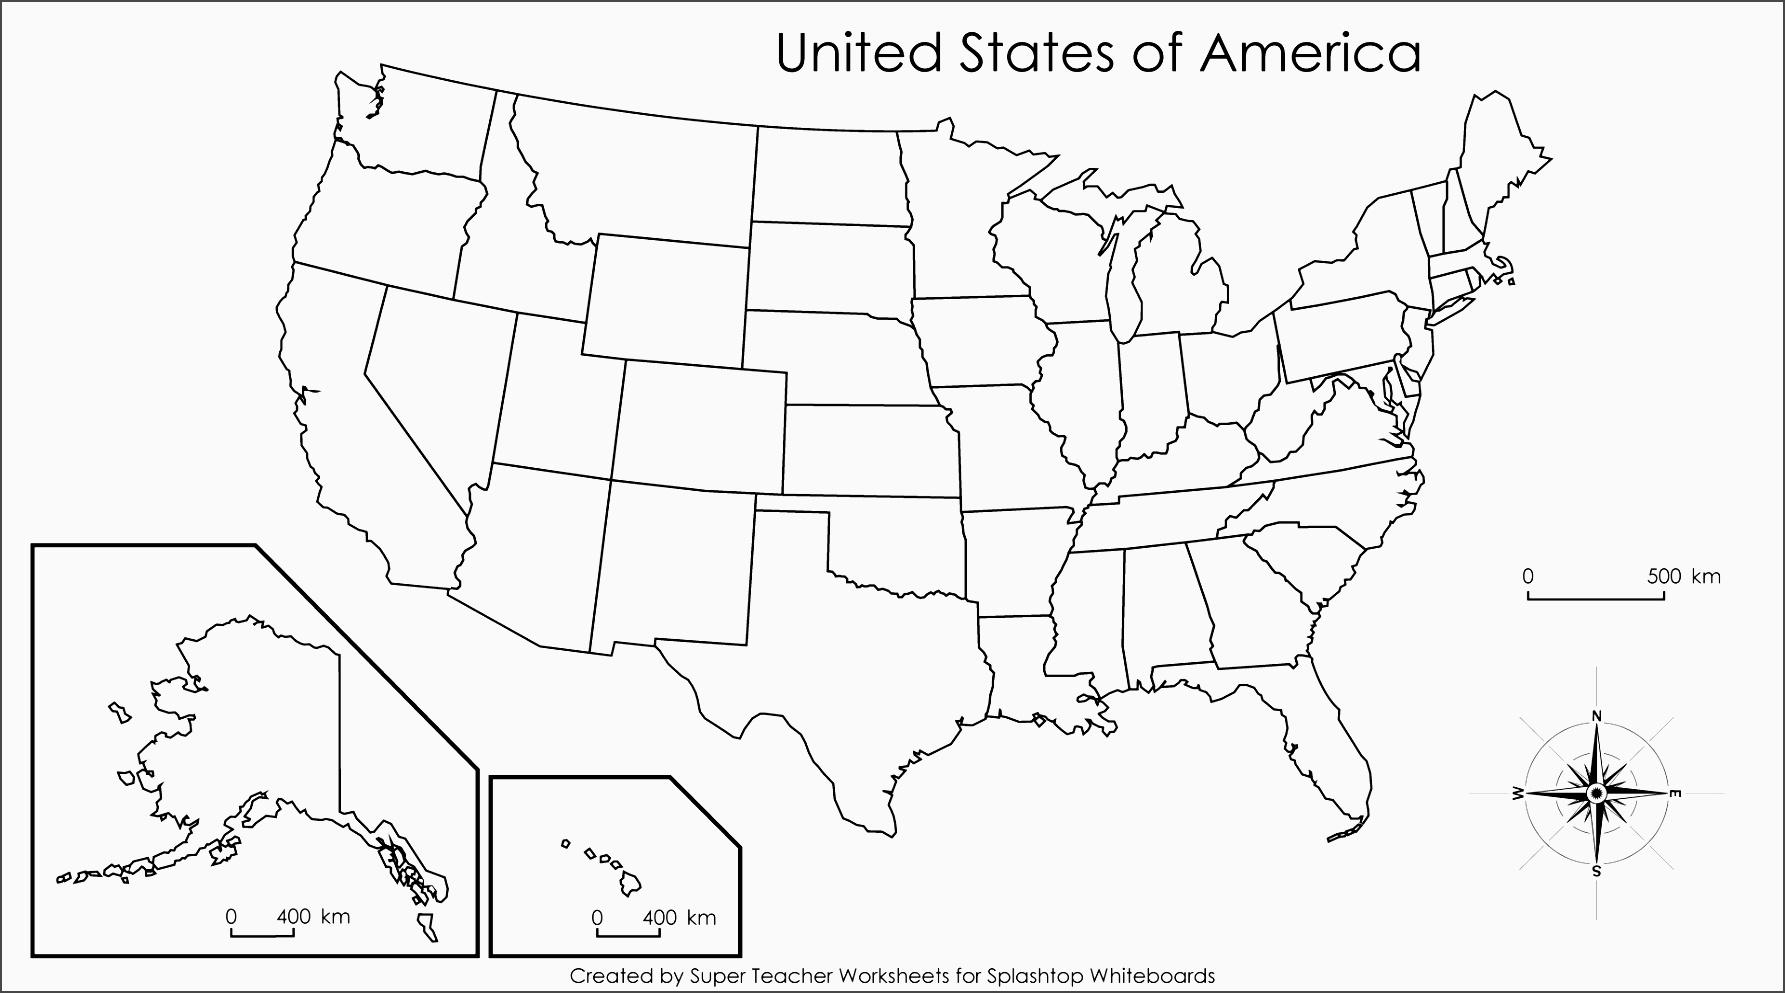 Blank State Map 50 States Map Blank Northern America Americas